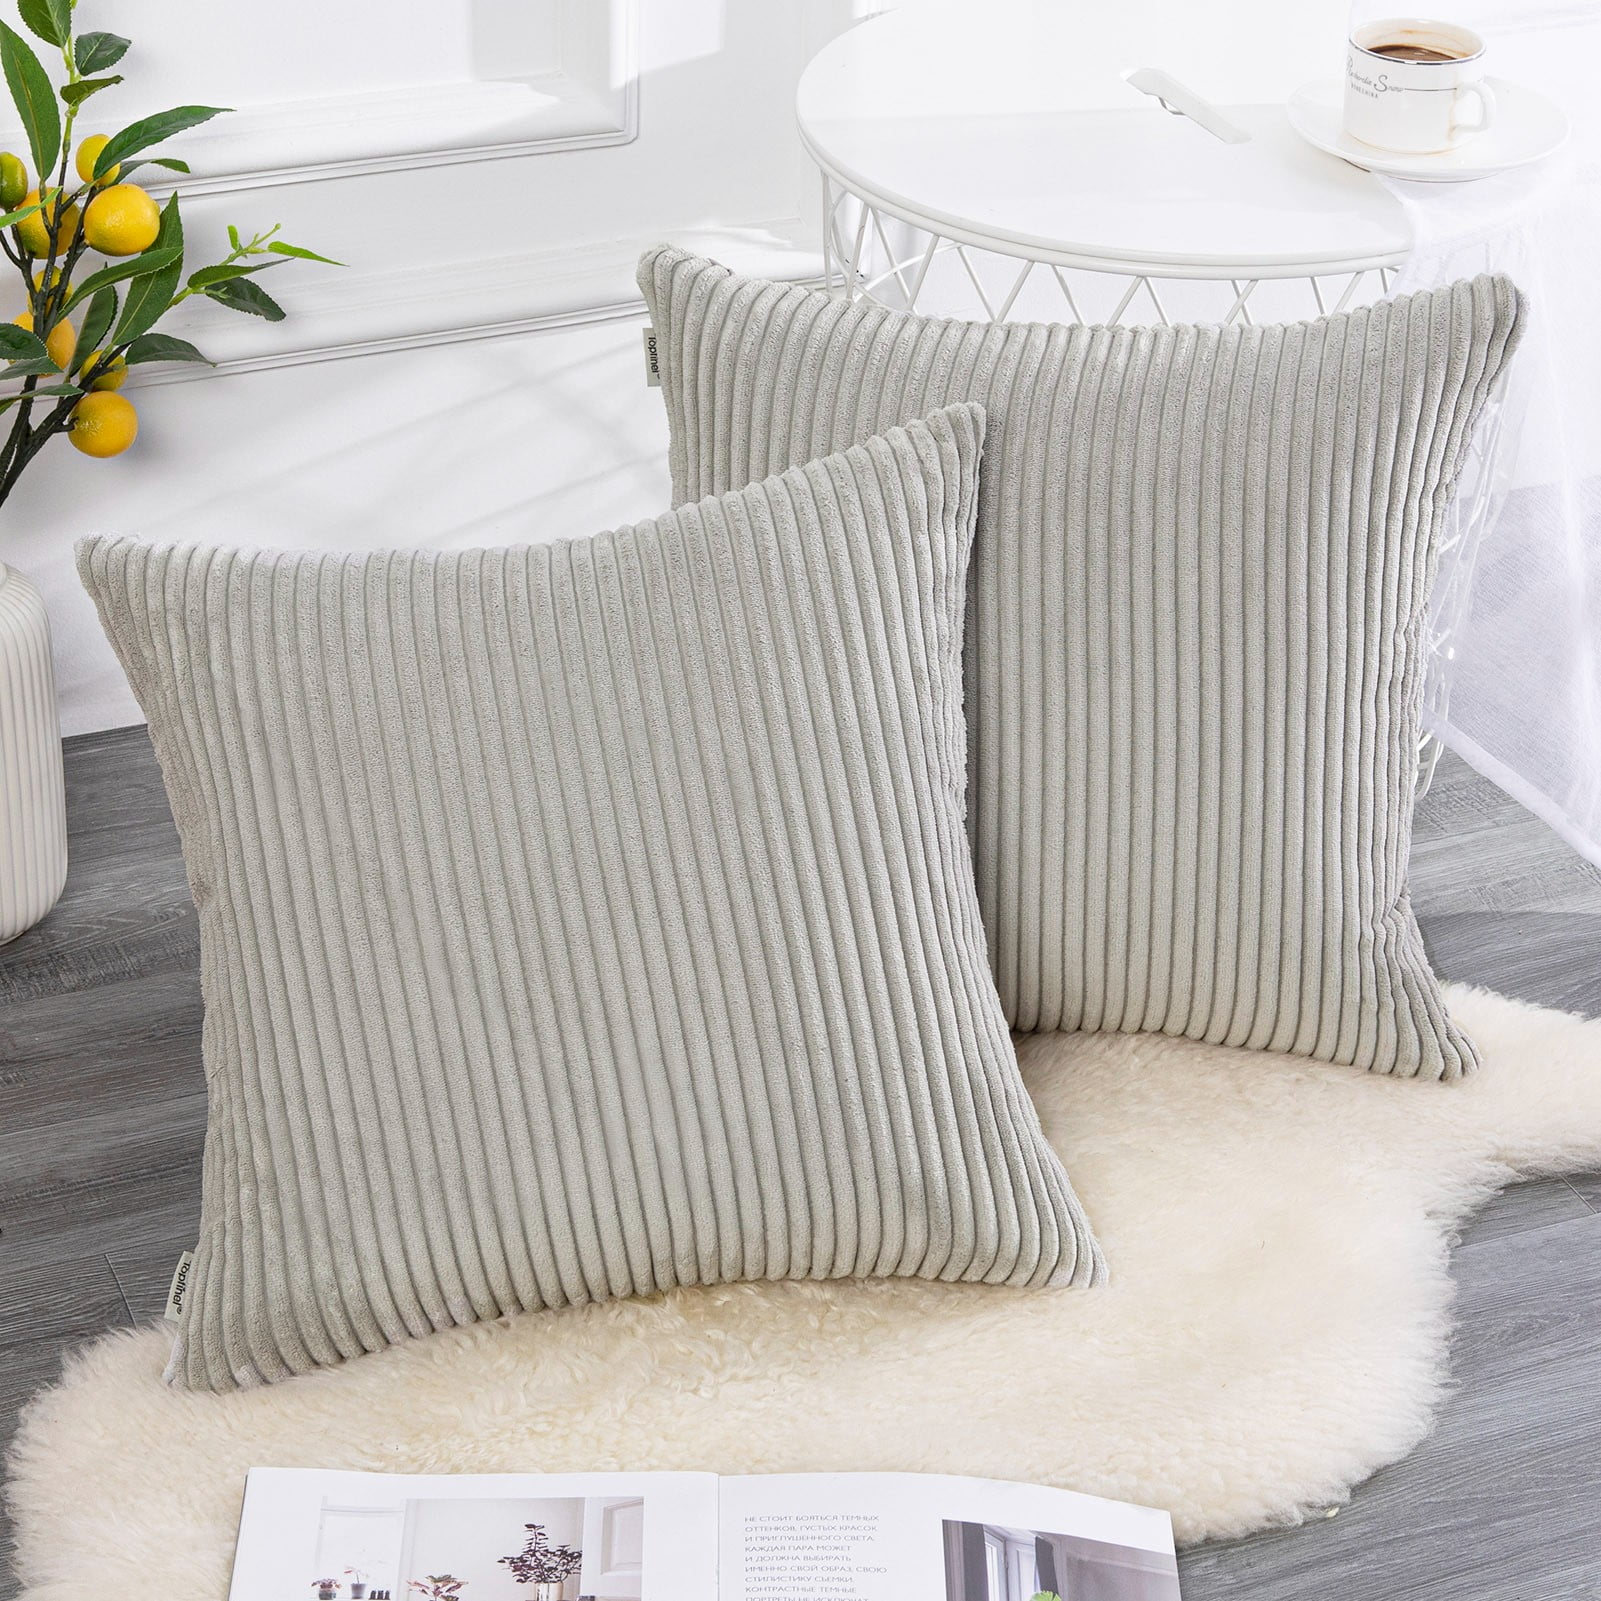 Topfinel Grey Couch Pillow Covers for Living Room 45x45 cm Set of 4,Mid  Century Modern White Neutral Corduroy Corn Throw Pillows,Rustic Square  Bench